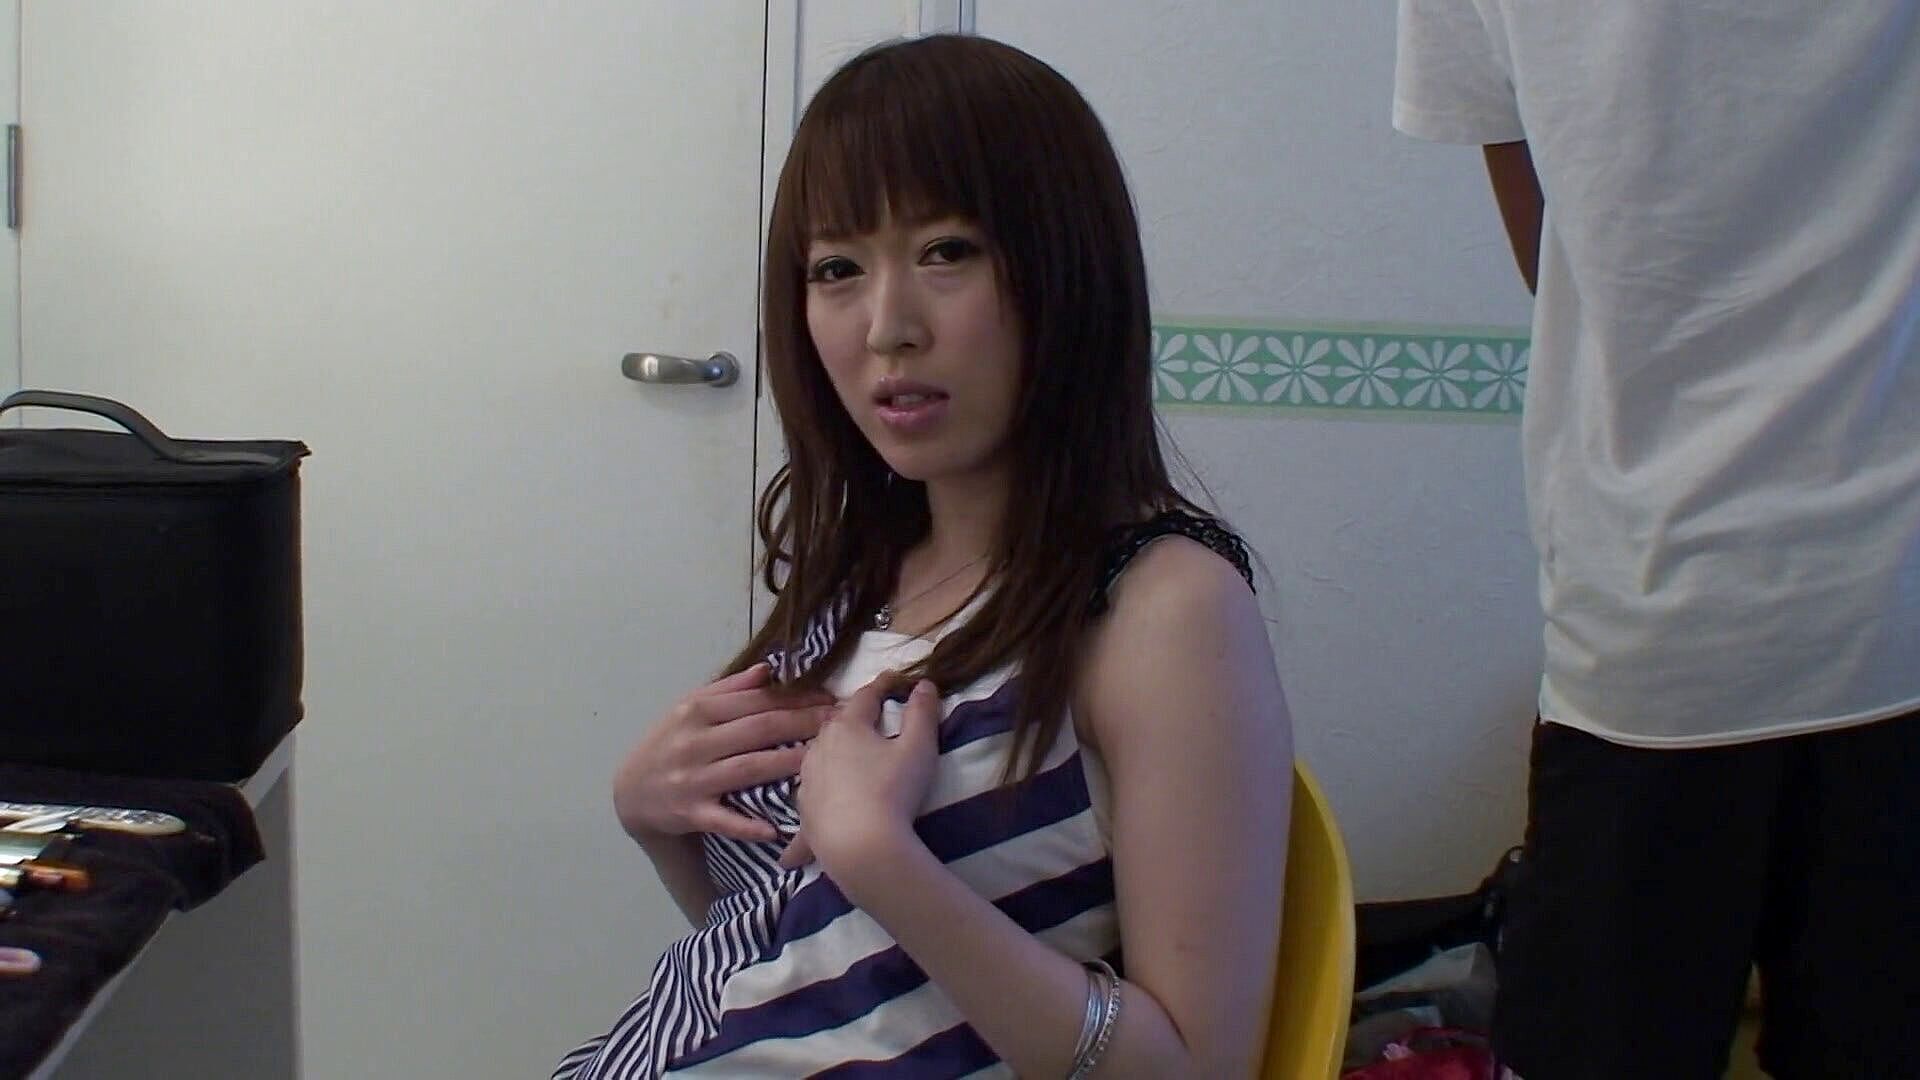 Teens & MILFs want to act in porn: Sweet Japanese babe loves to tease before kinky sex –  – Solo Japanese